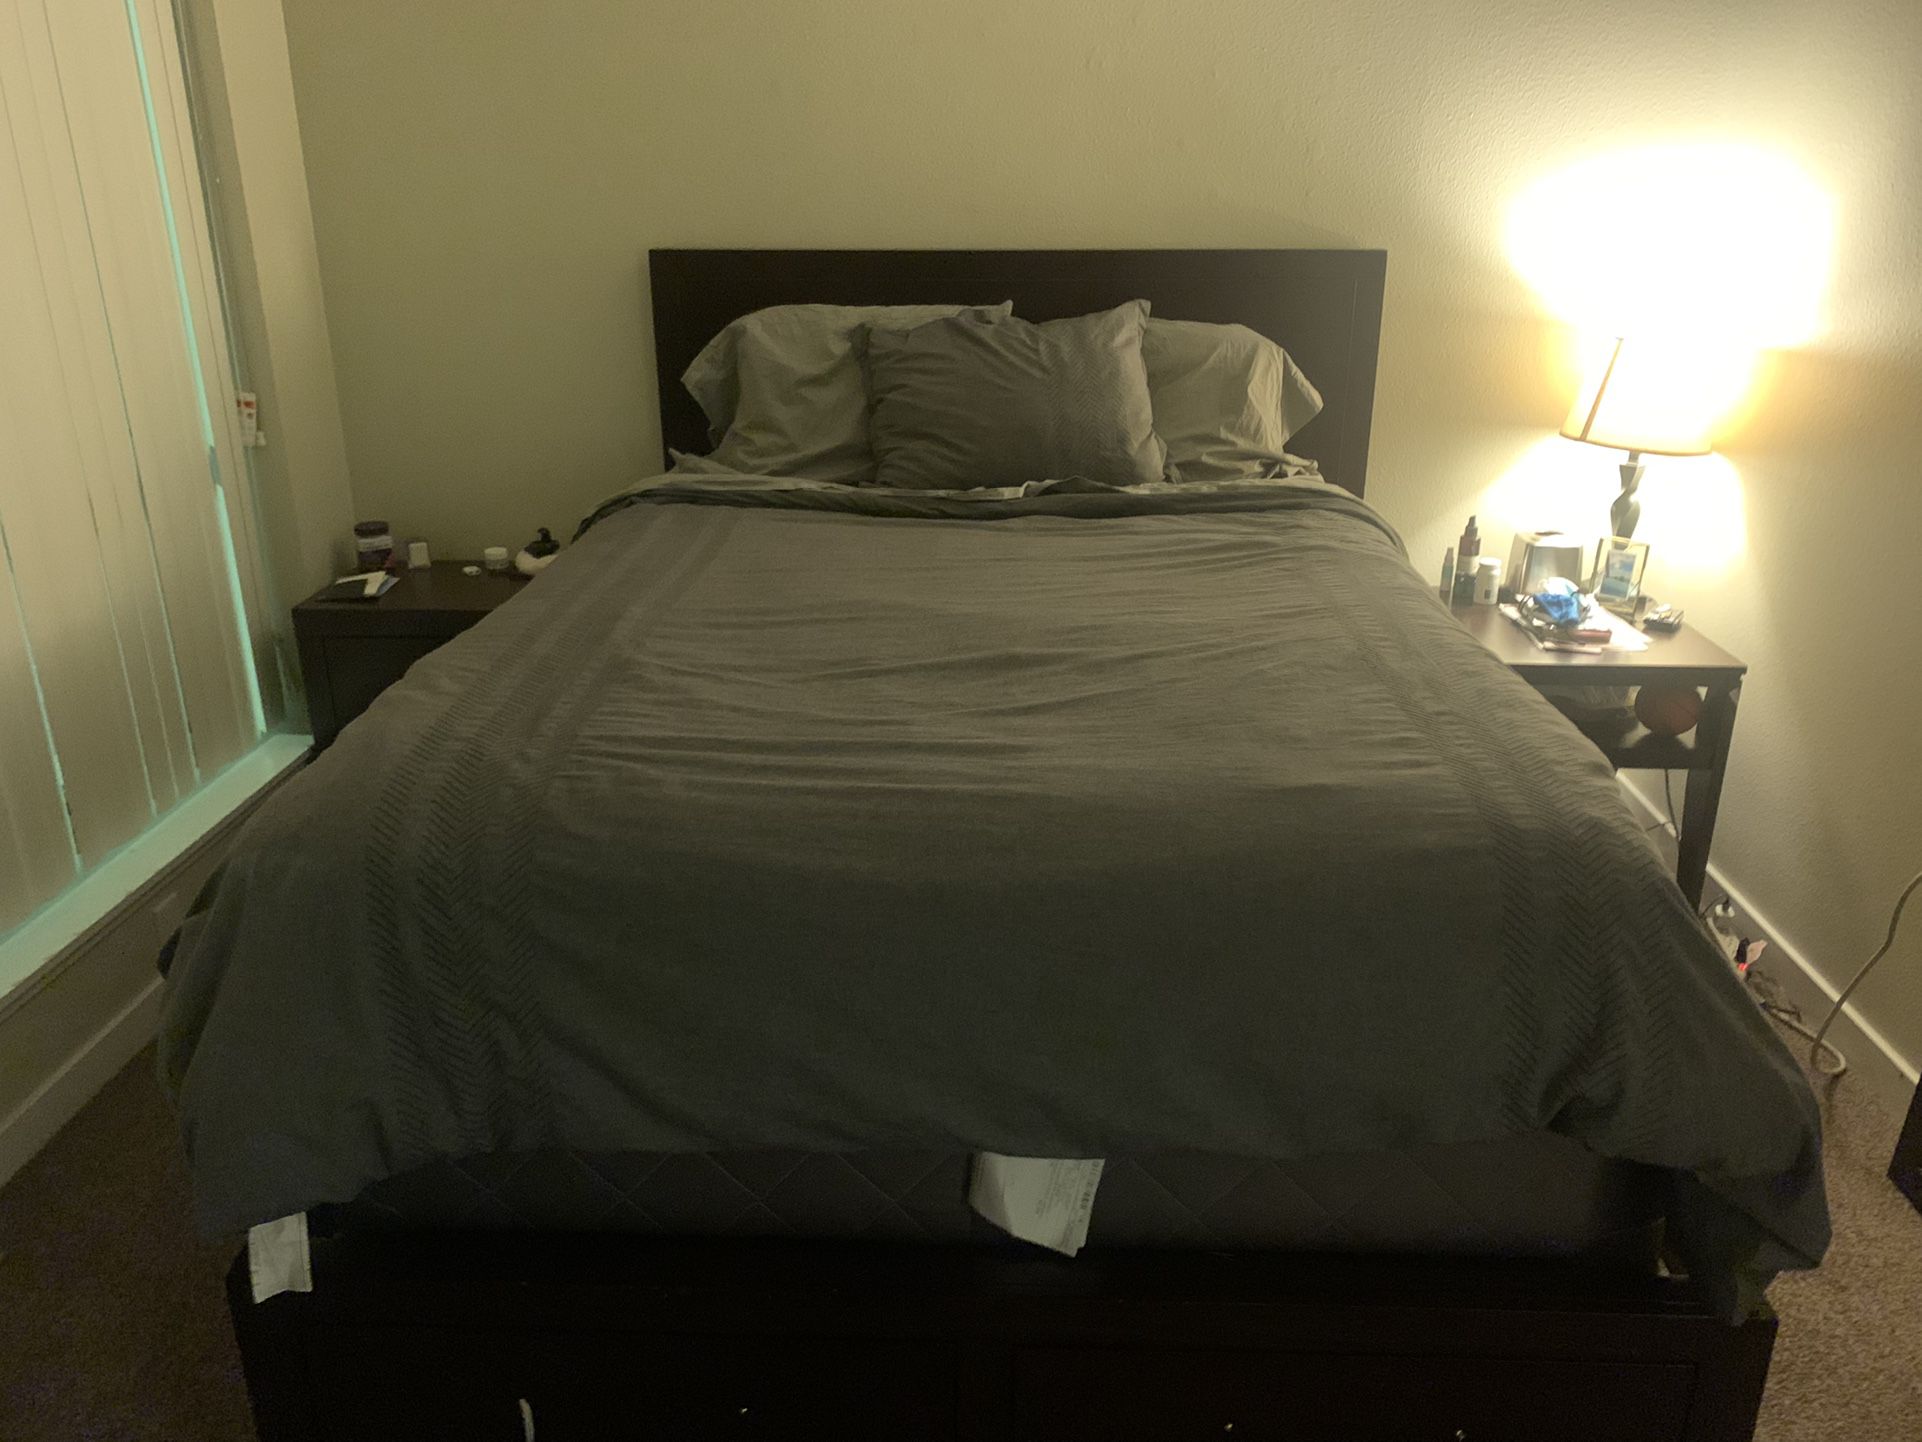          6.5 Feet By 5Queen bed with storage, box spring and mattress 